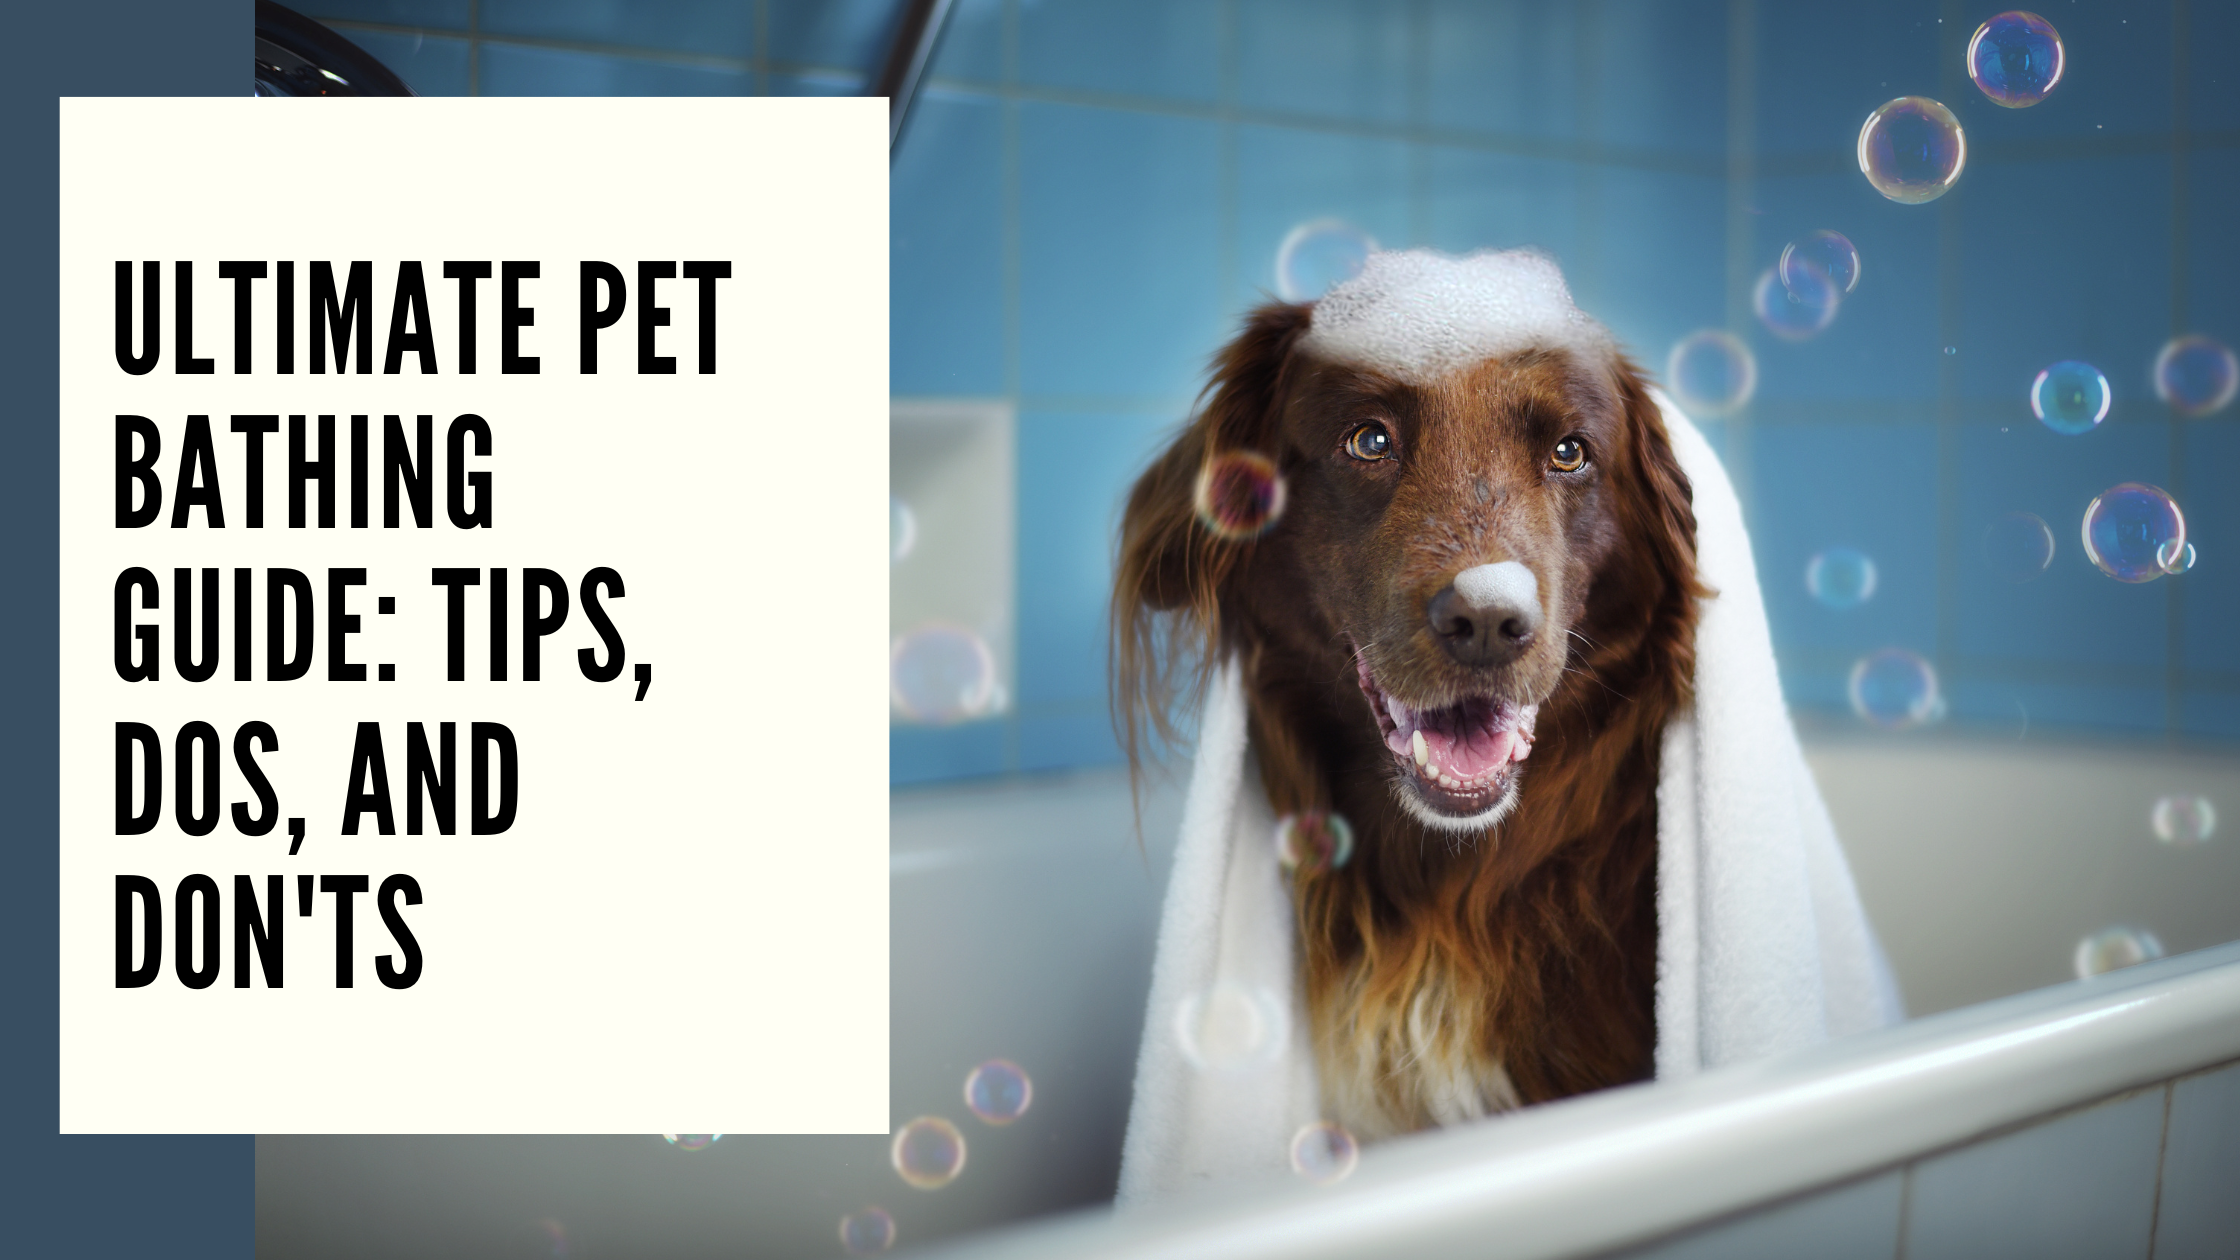 Ultimate Pet Bathing Guide Tips, Dos, and Don'ts